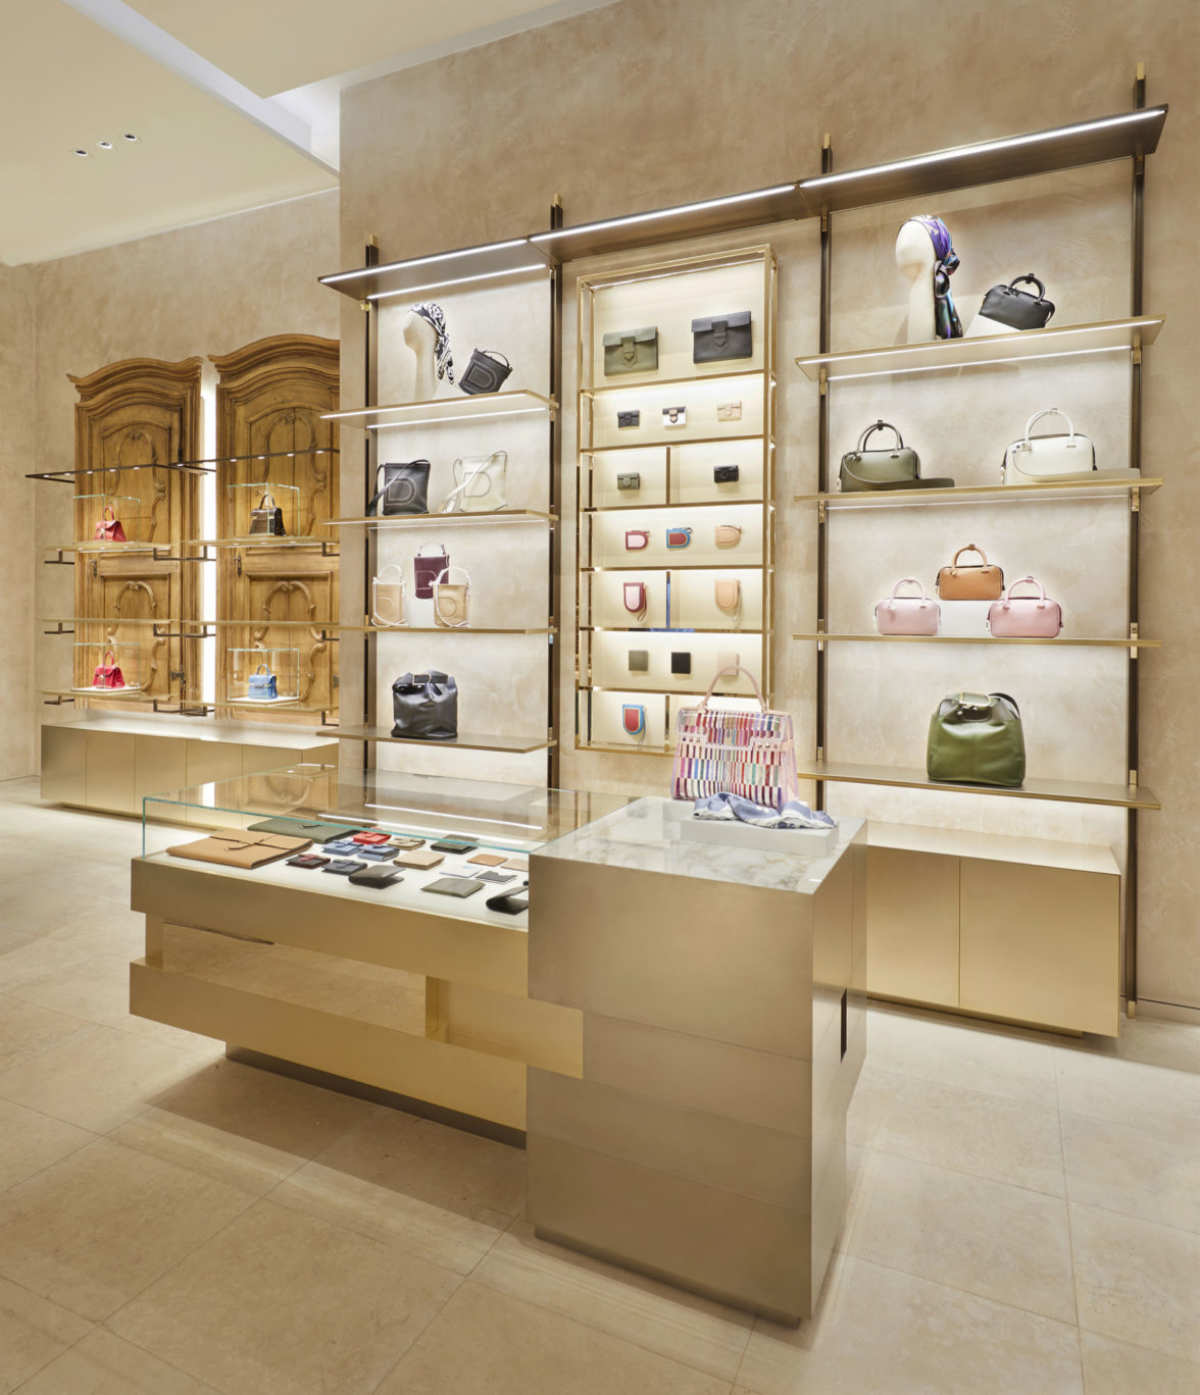 Delvaux: Delvaux opened on the legendary rue St Honoré in Paris - Luxferity